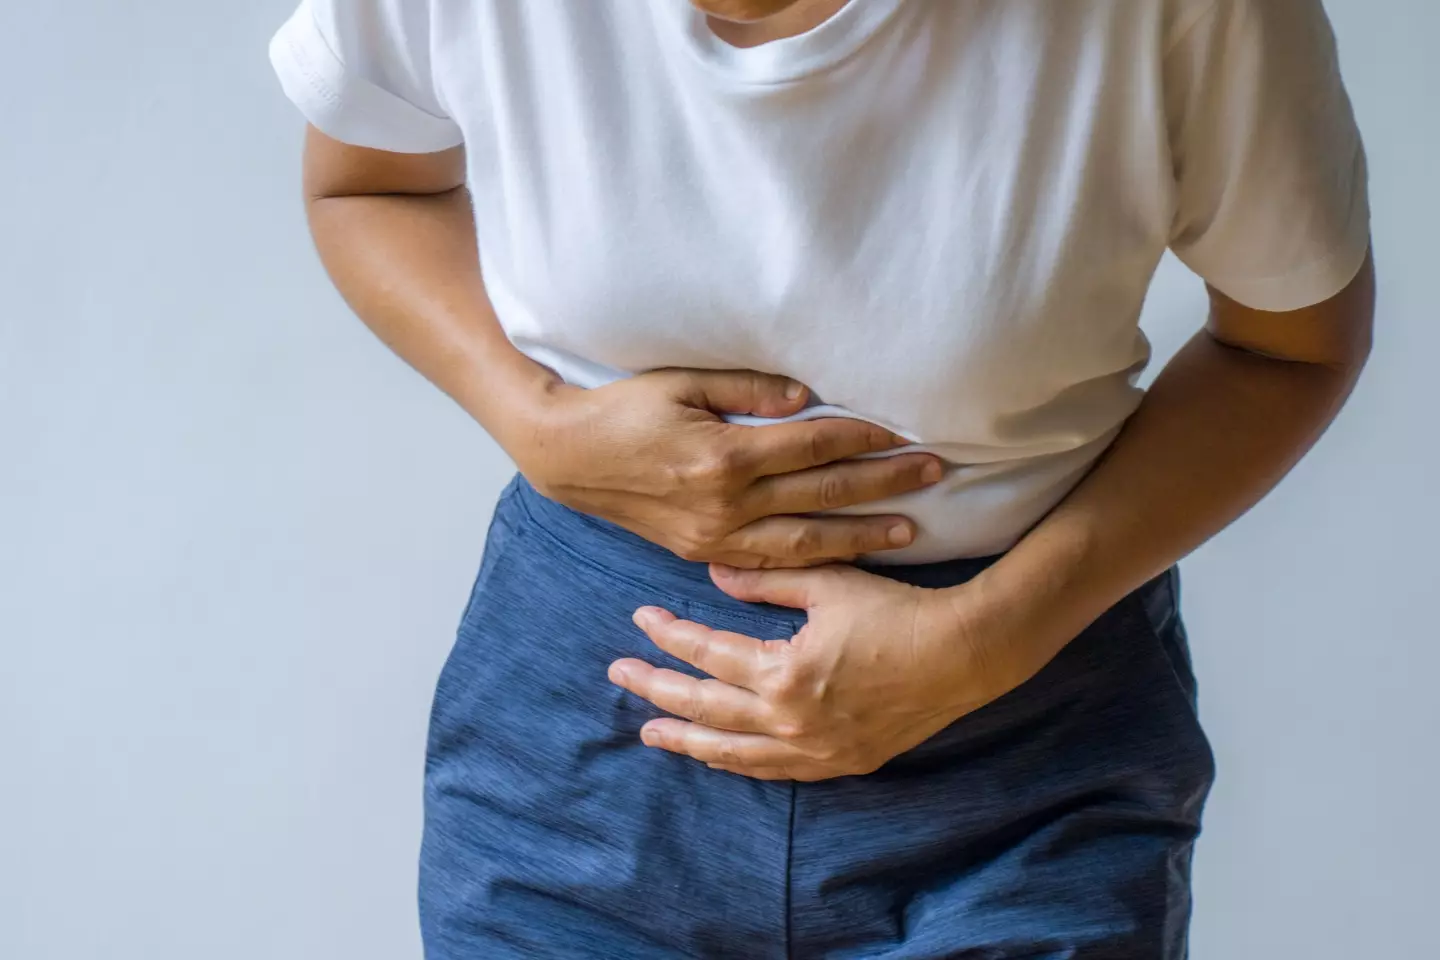 Tummy pains are a warning sign of bowel cancer.